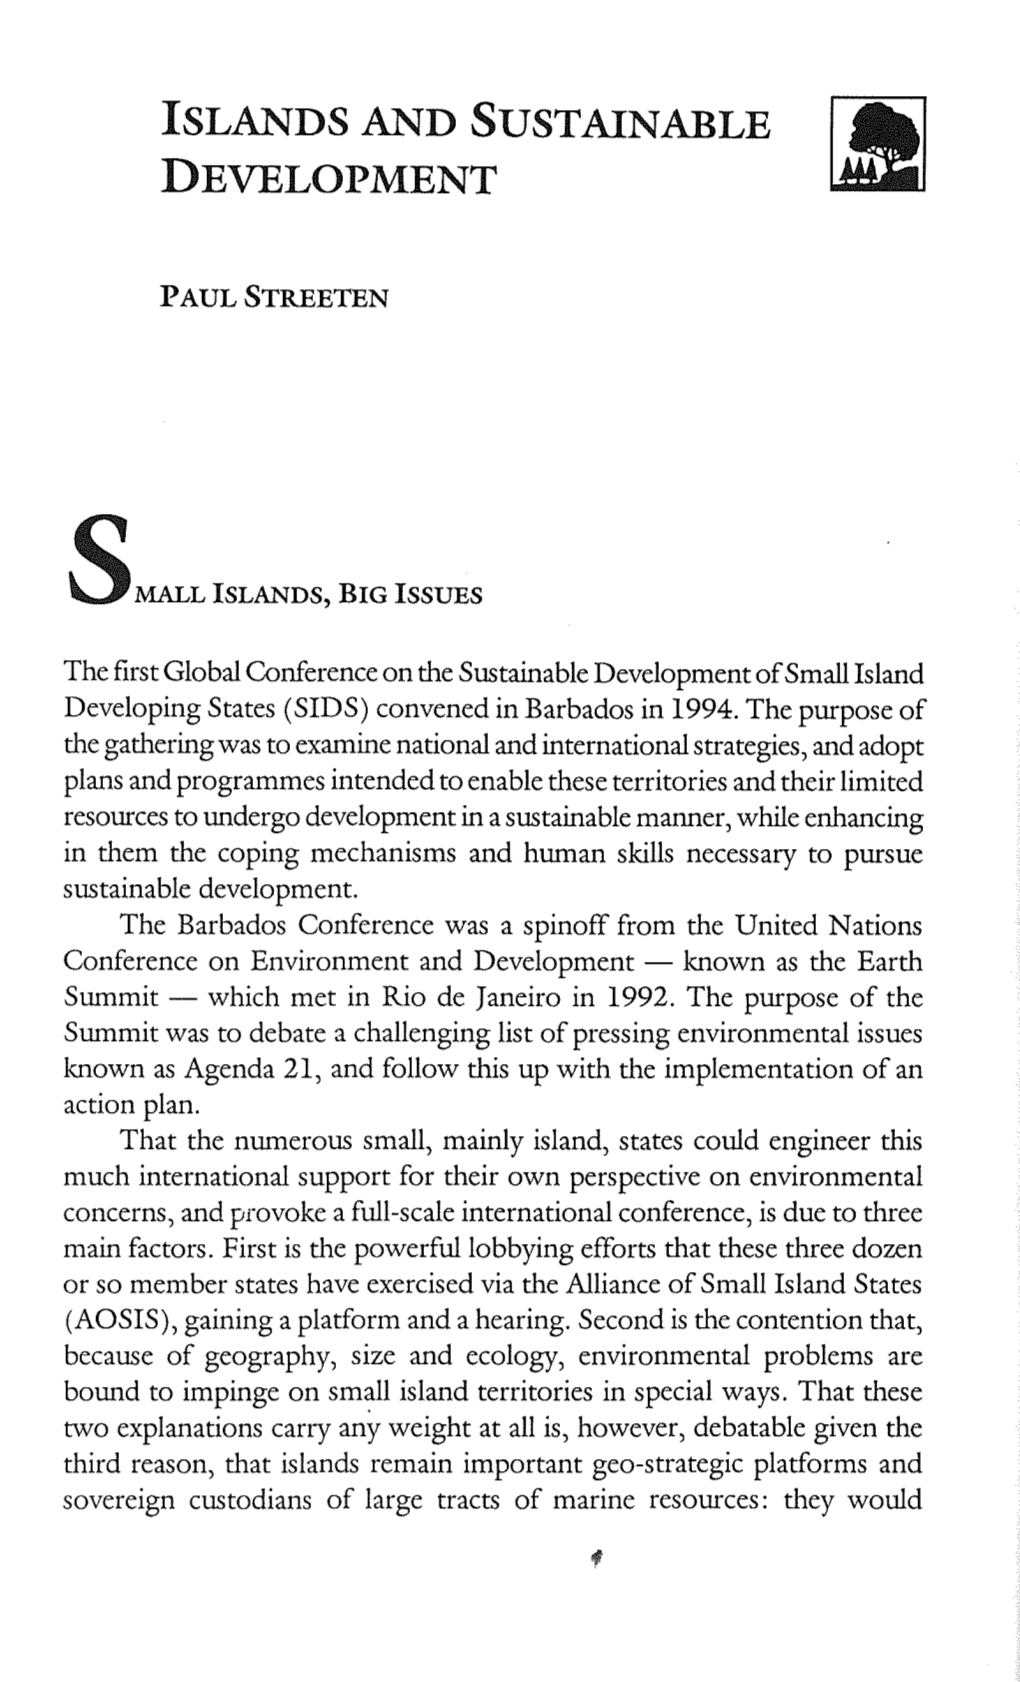 Islands and Sustainable Development